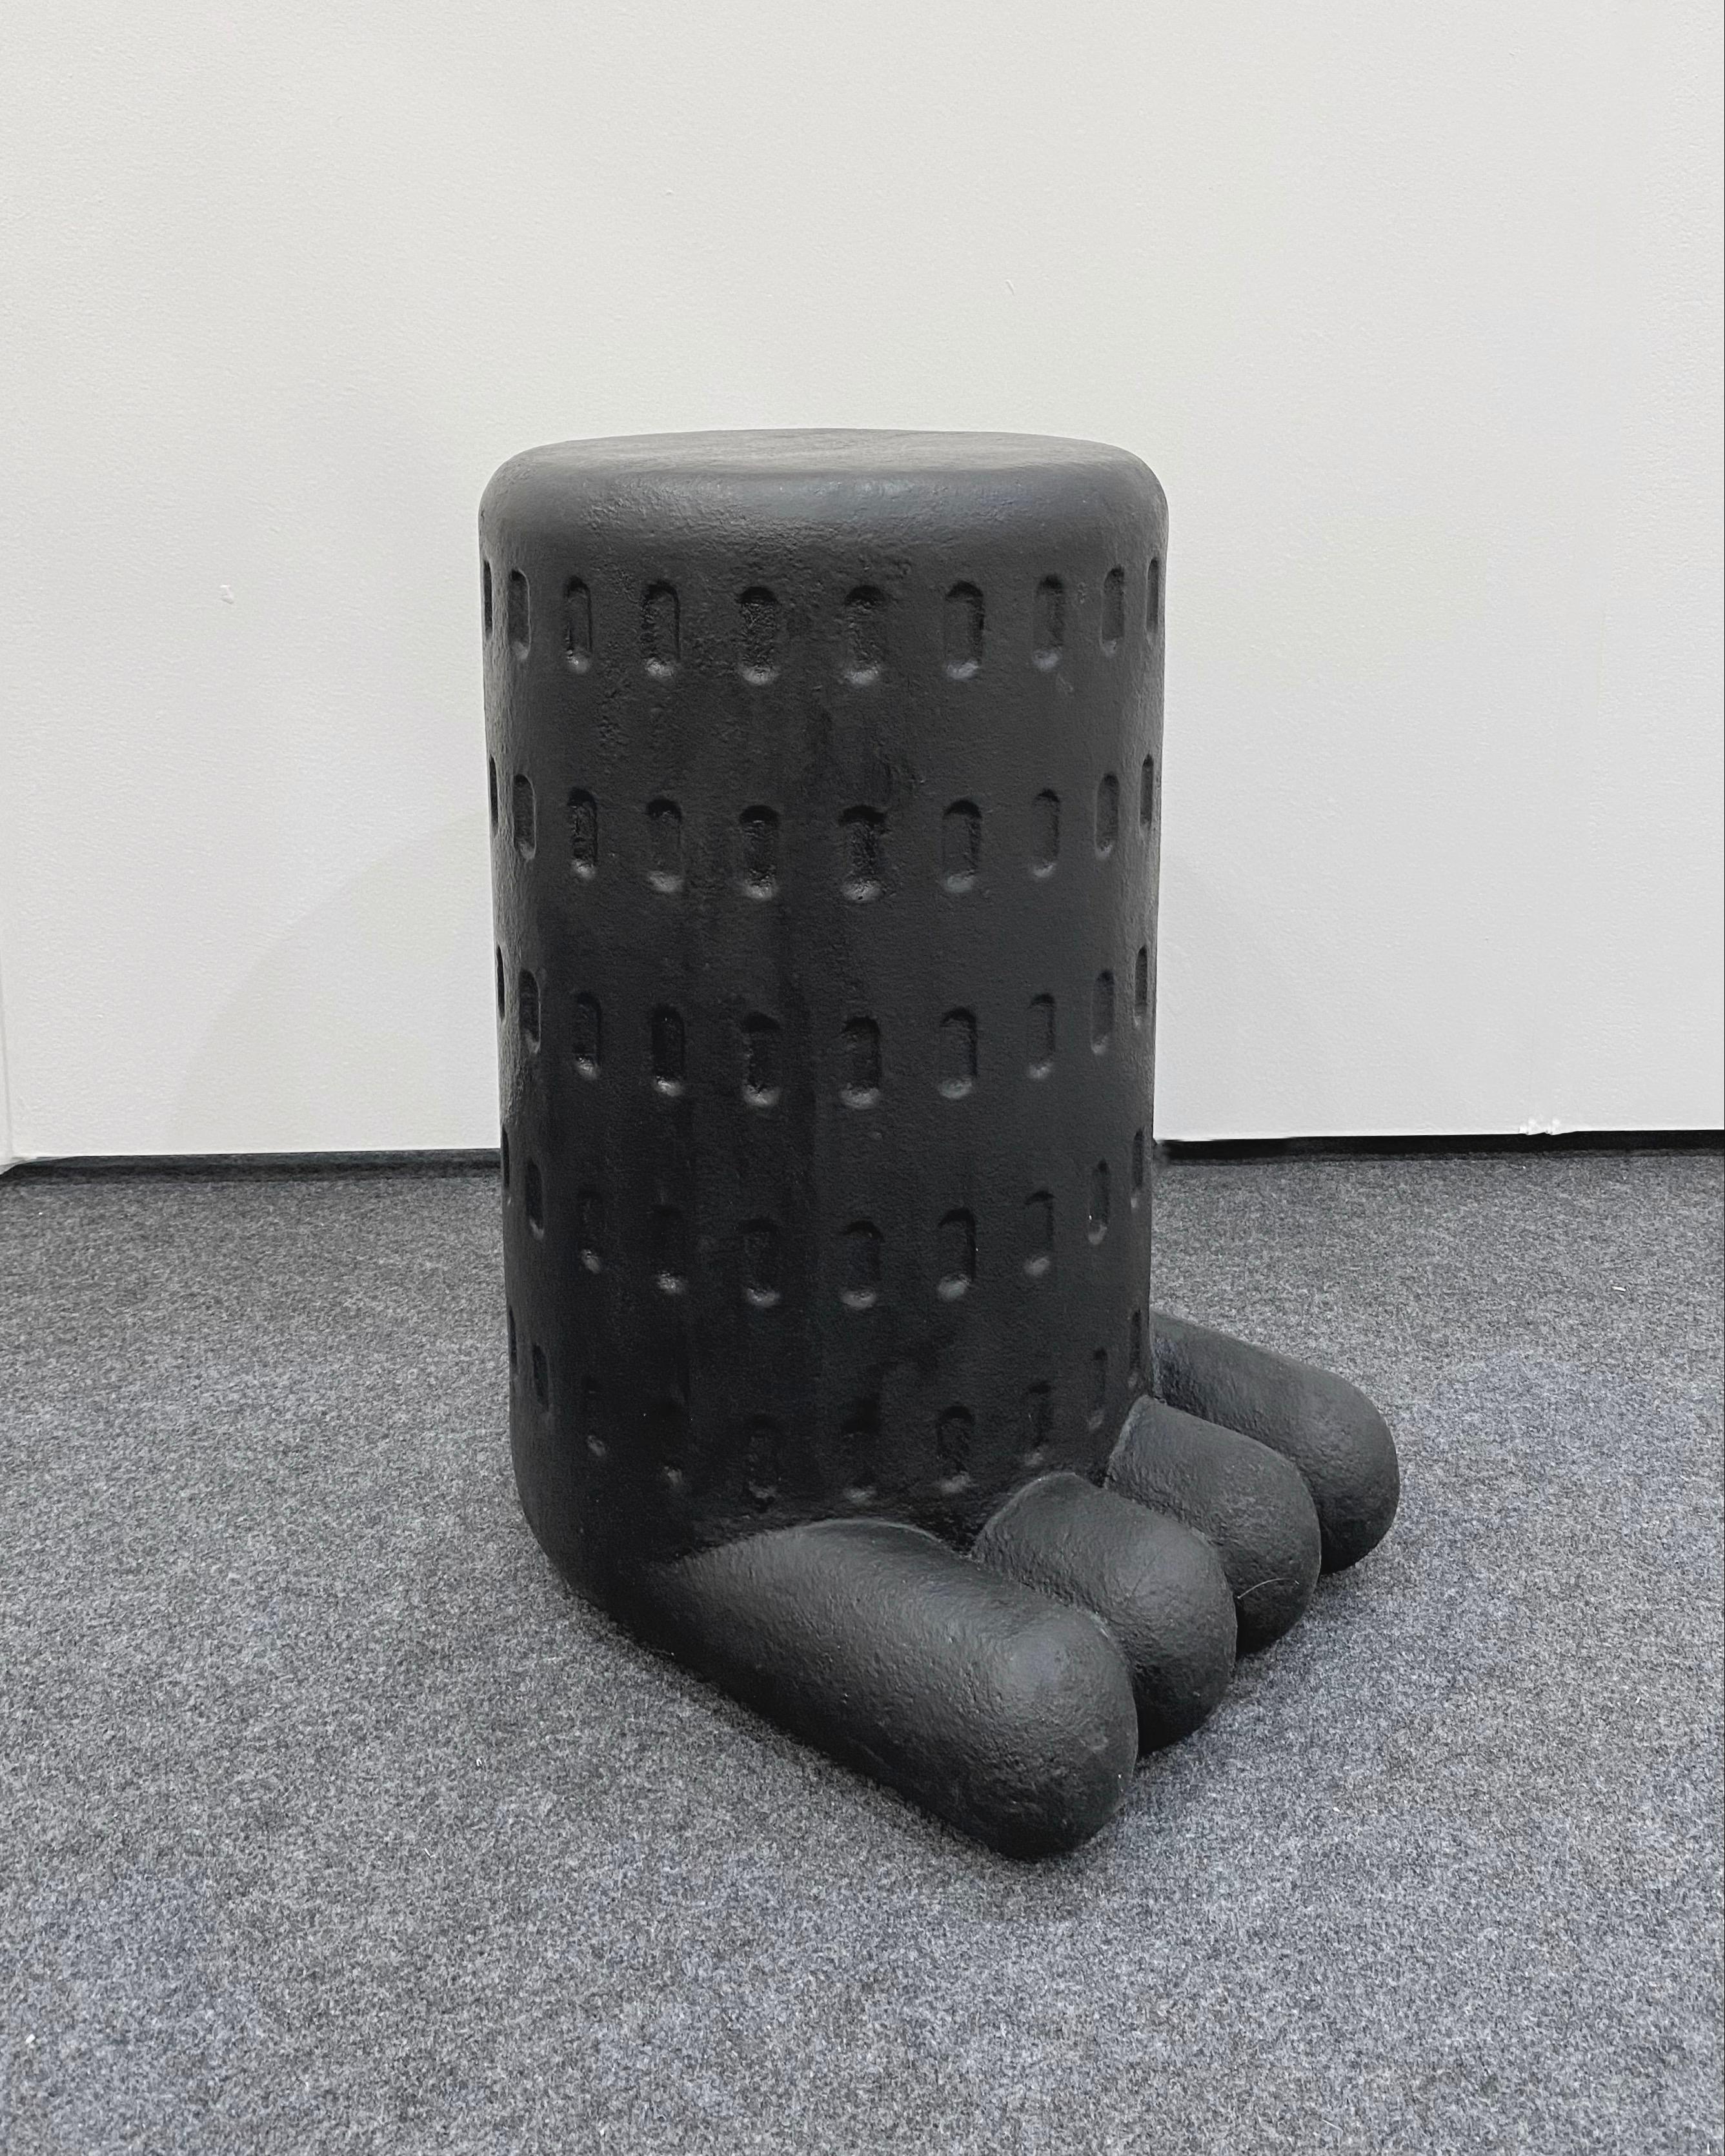 Black paw stool by Hakmin Lee
Materials: FRB
Dimensions: 29 x 37.5 x 50 cm

Studio HAK is Seoul based studio led by designer Hakmin Lee, who has an ambition of creating our environment bit more humorous through everyday objects.

Studio HAK